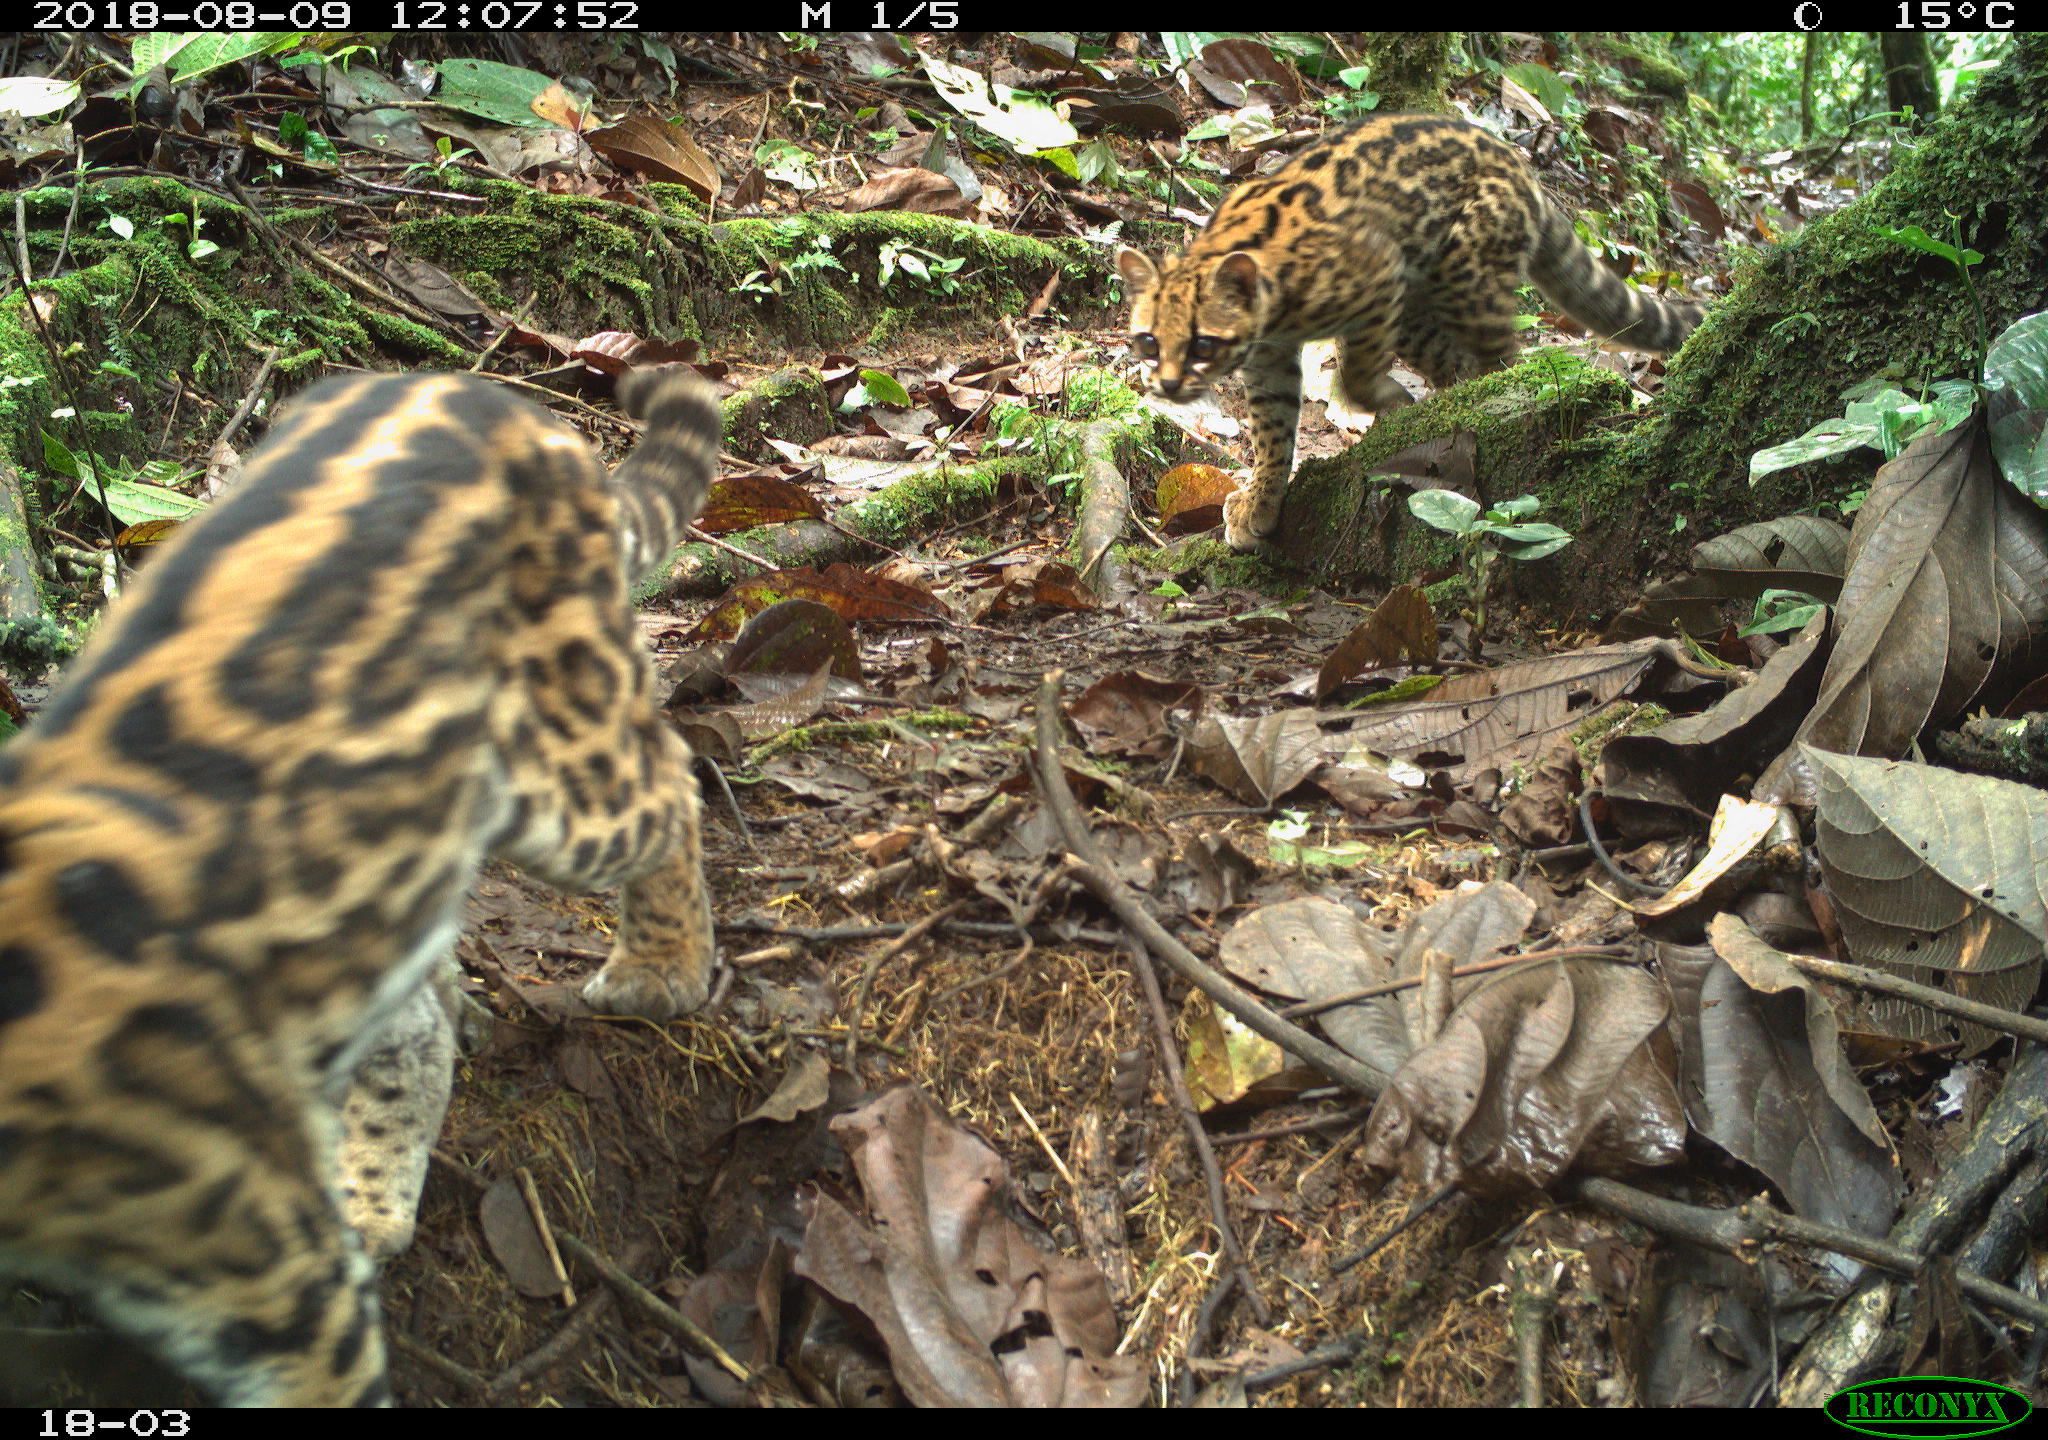 A pair of margays approach each other in the wild.